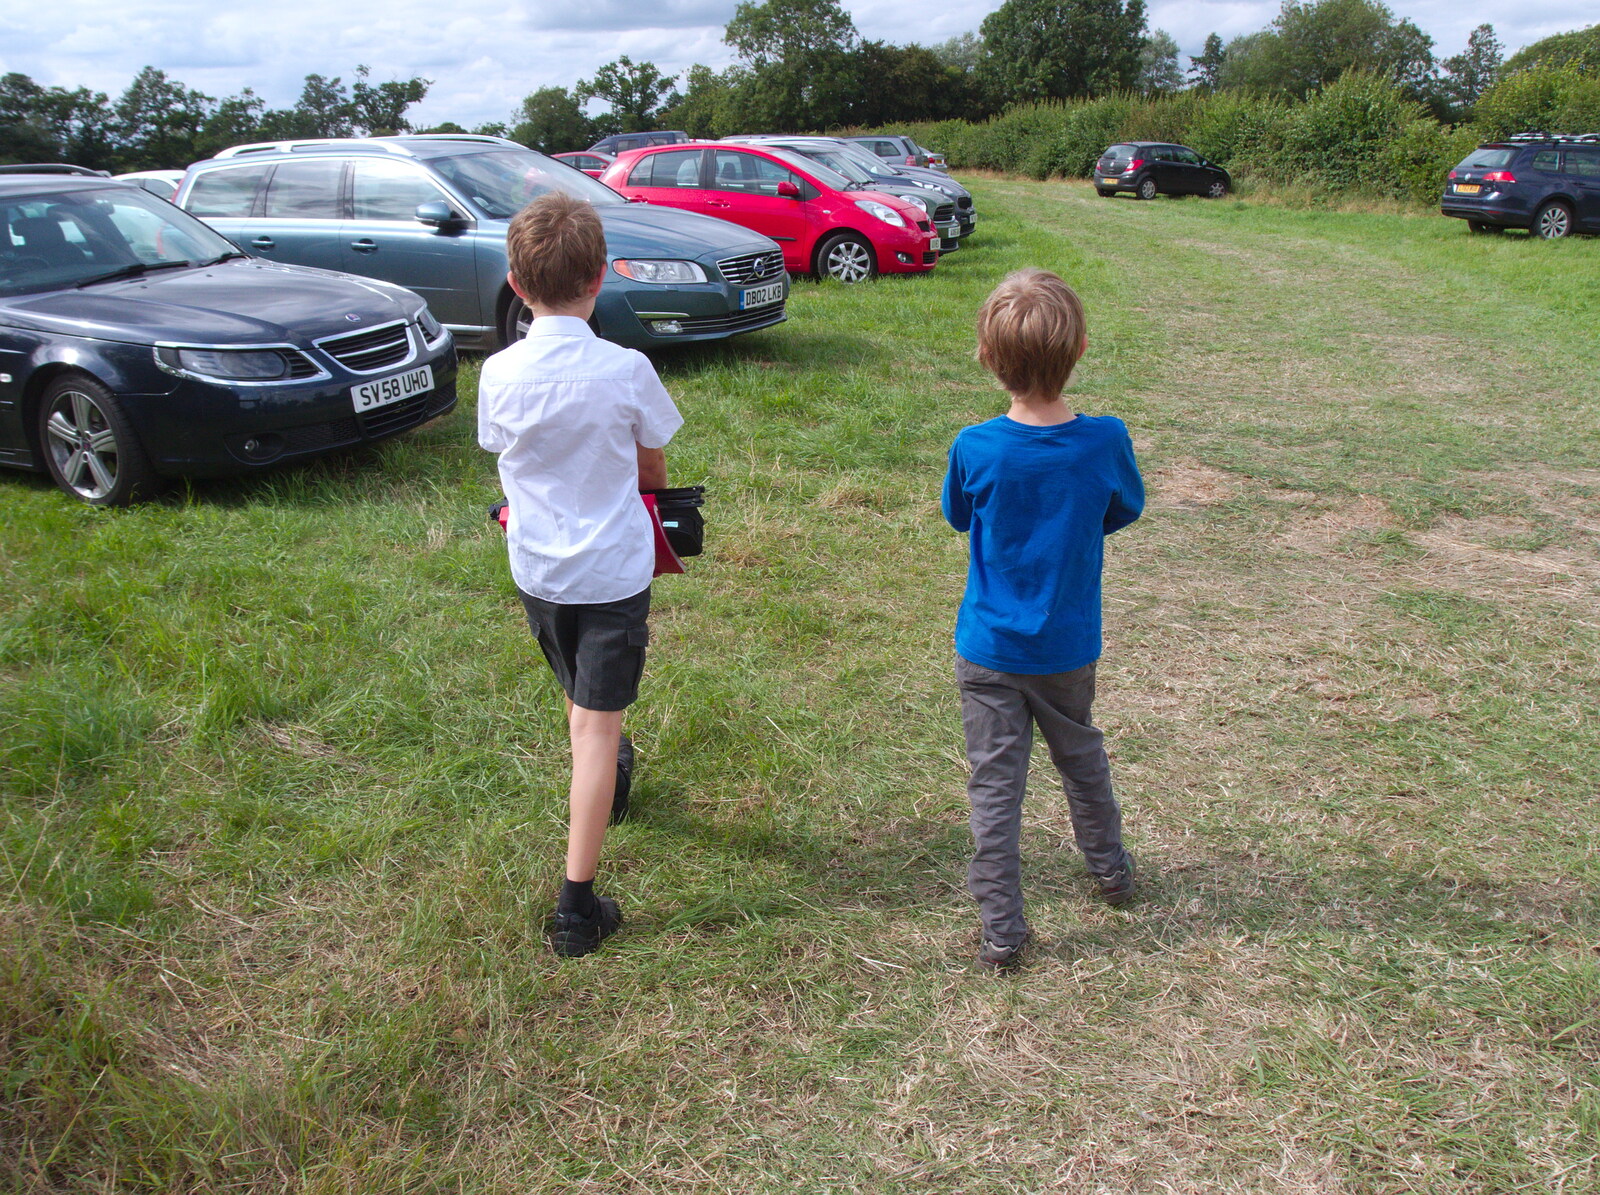 A car park in a field from GSB at the Summer Fete, Market Weston, Suffolk - 20th July 2019